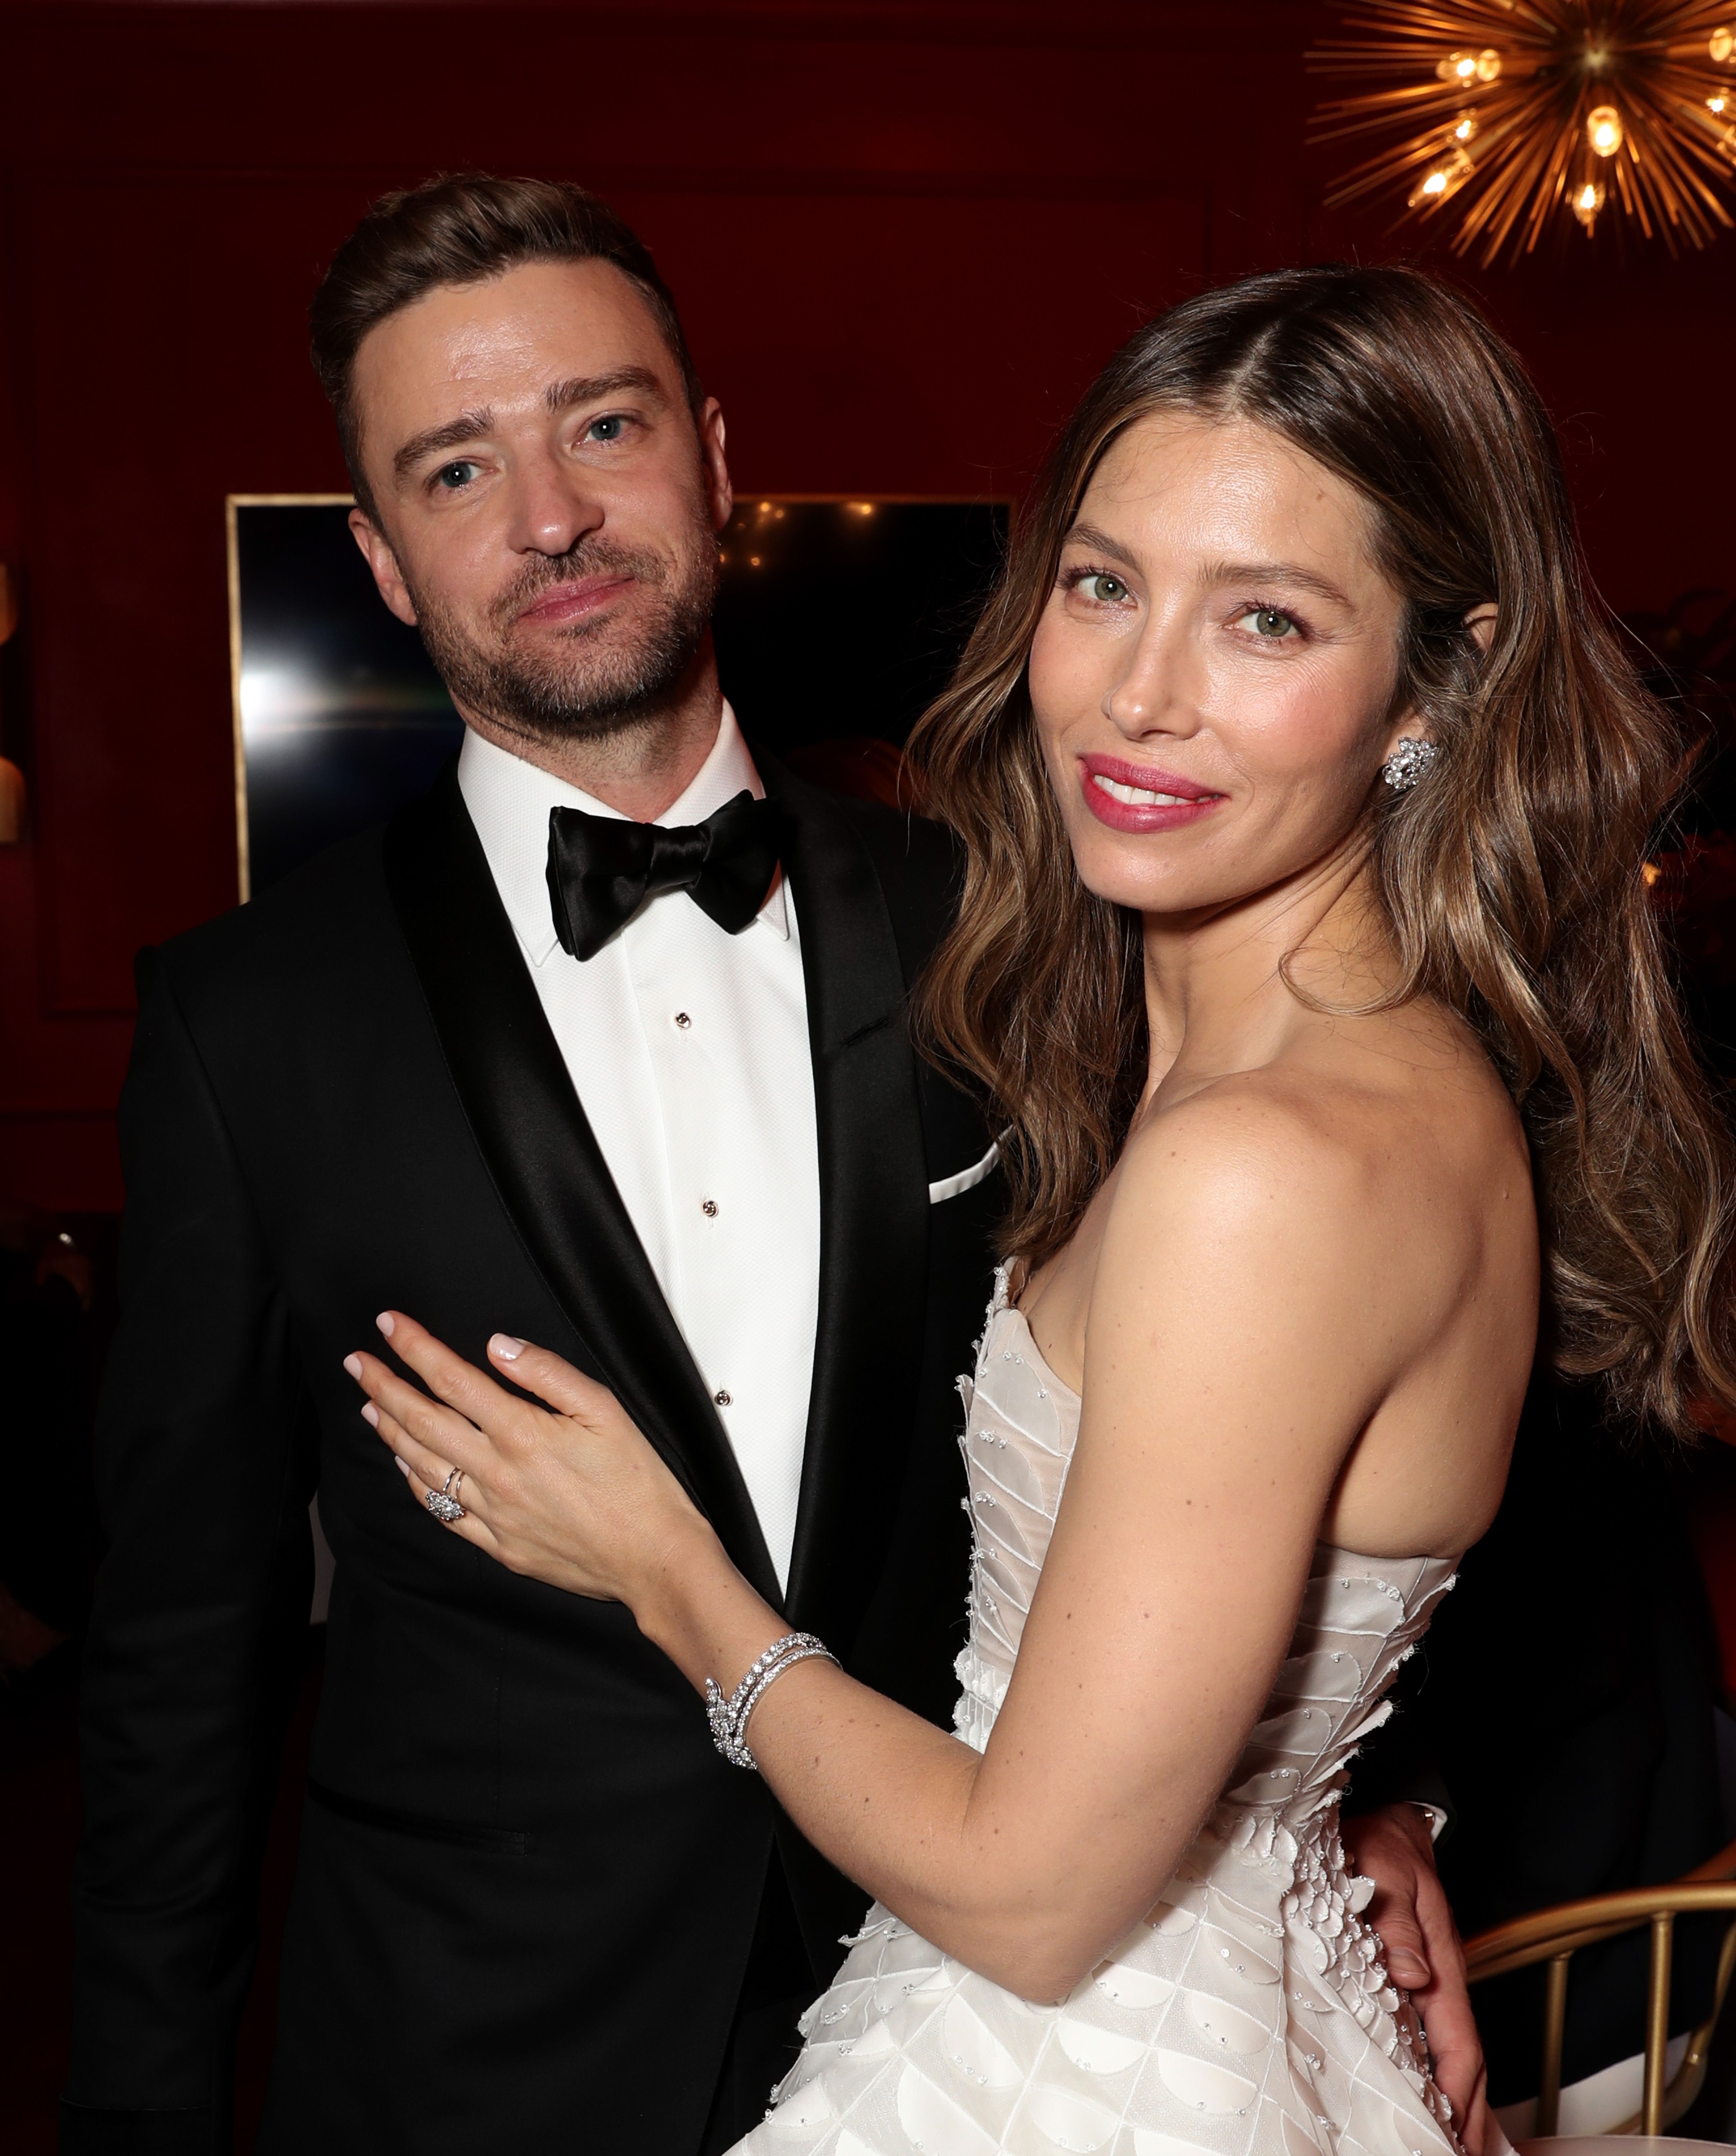 Justin Timberlake and Jessica Biel at the 70th Annual Primetime Emmy Awards on September 17, 2018 | Photo: Getty Images